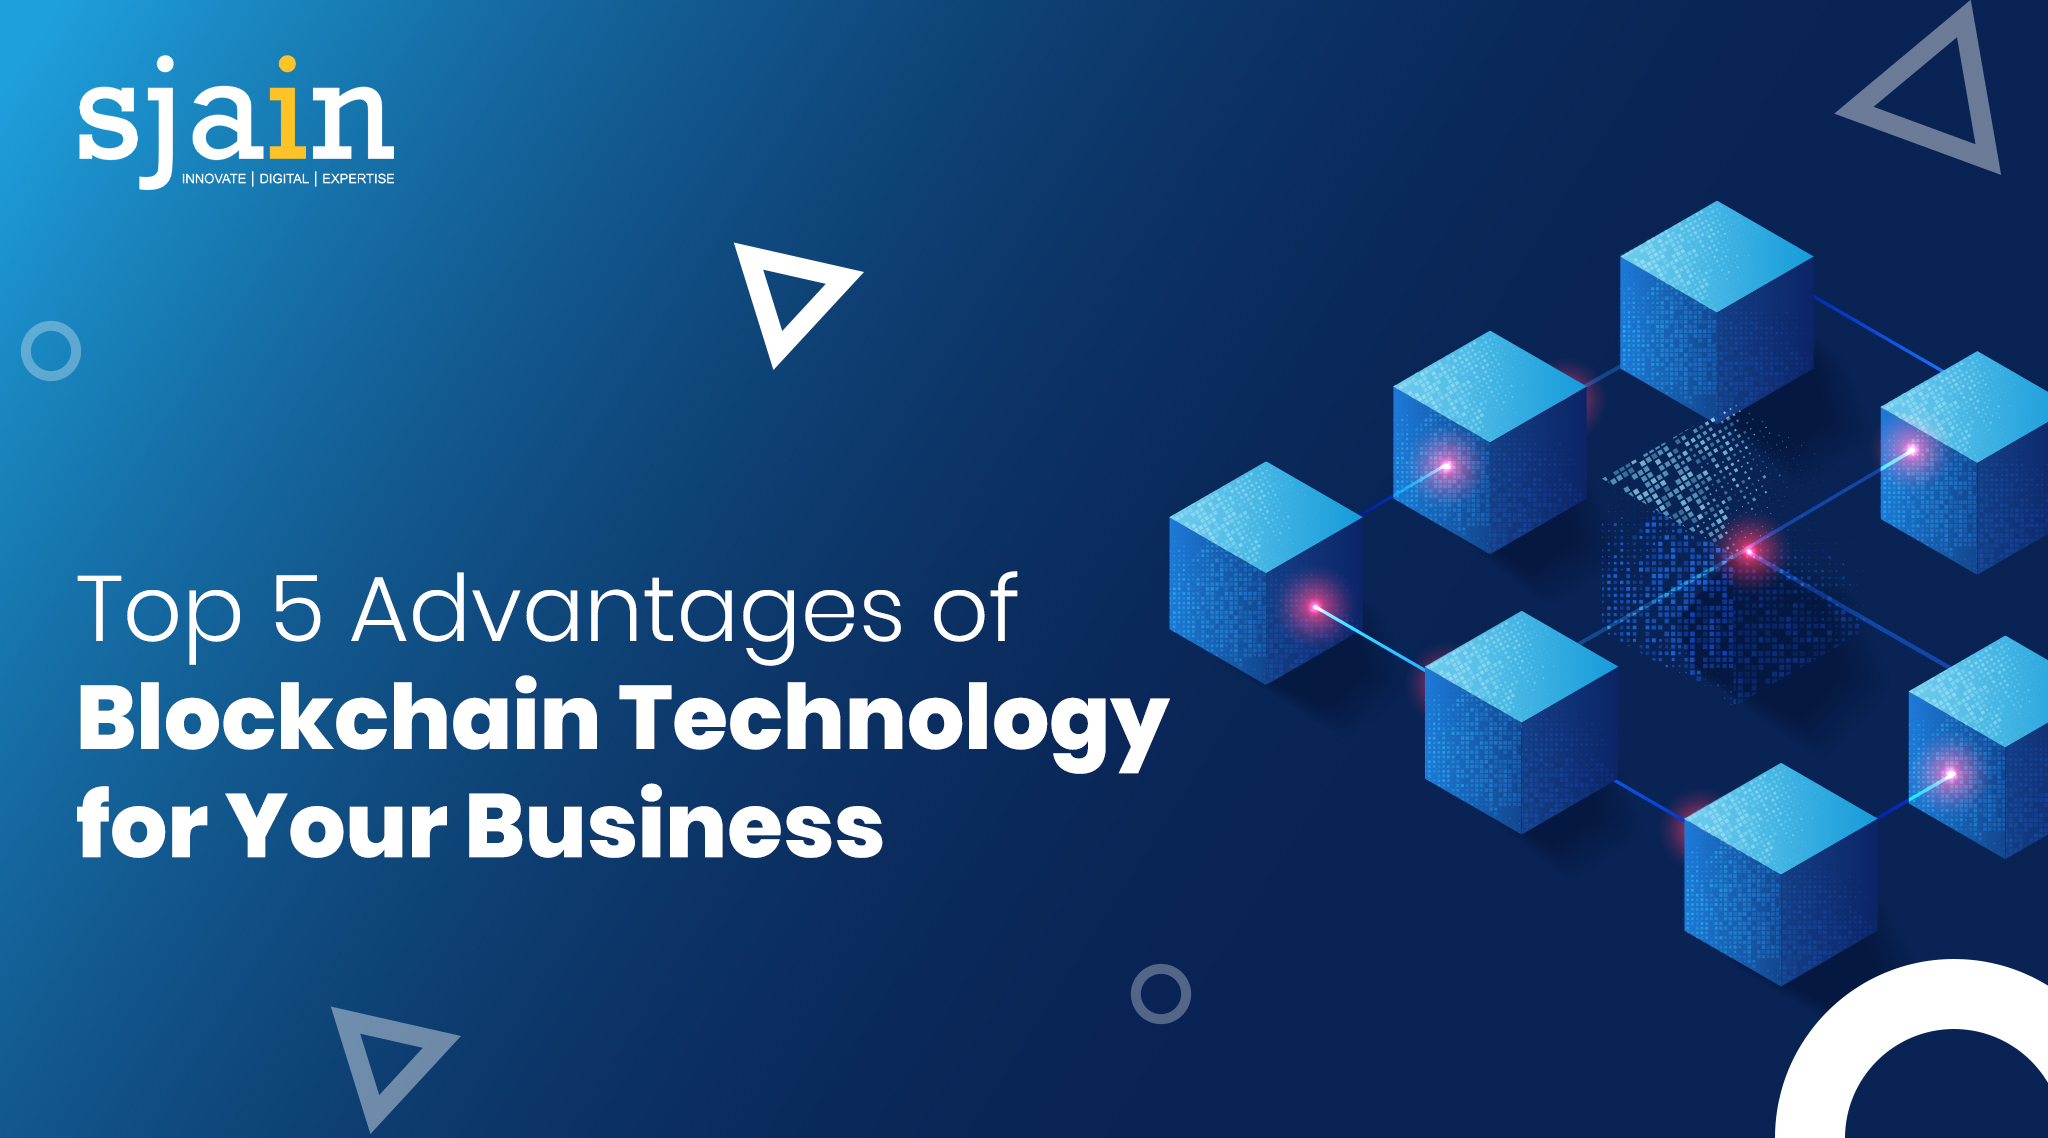 Top 5 Advantages of Blockchain Technology for Your Business